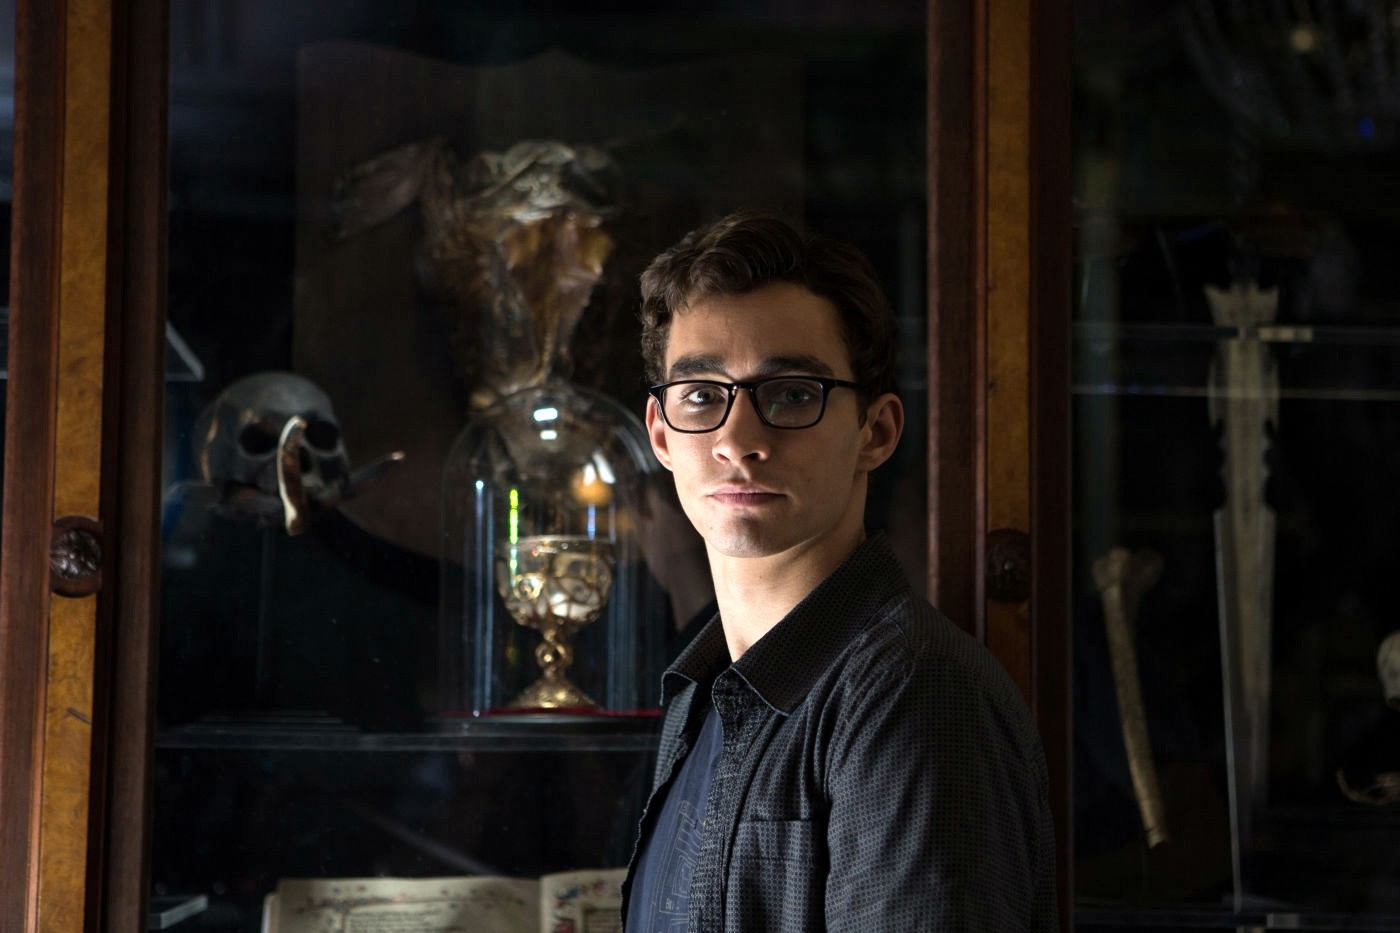 Robert Sheehan stars as Simon Lewis in Screen Gems' The Mortal Instruments: City of Bones (2013). Photo credit by Rafy.